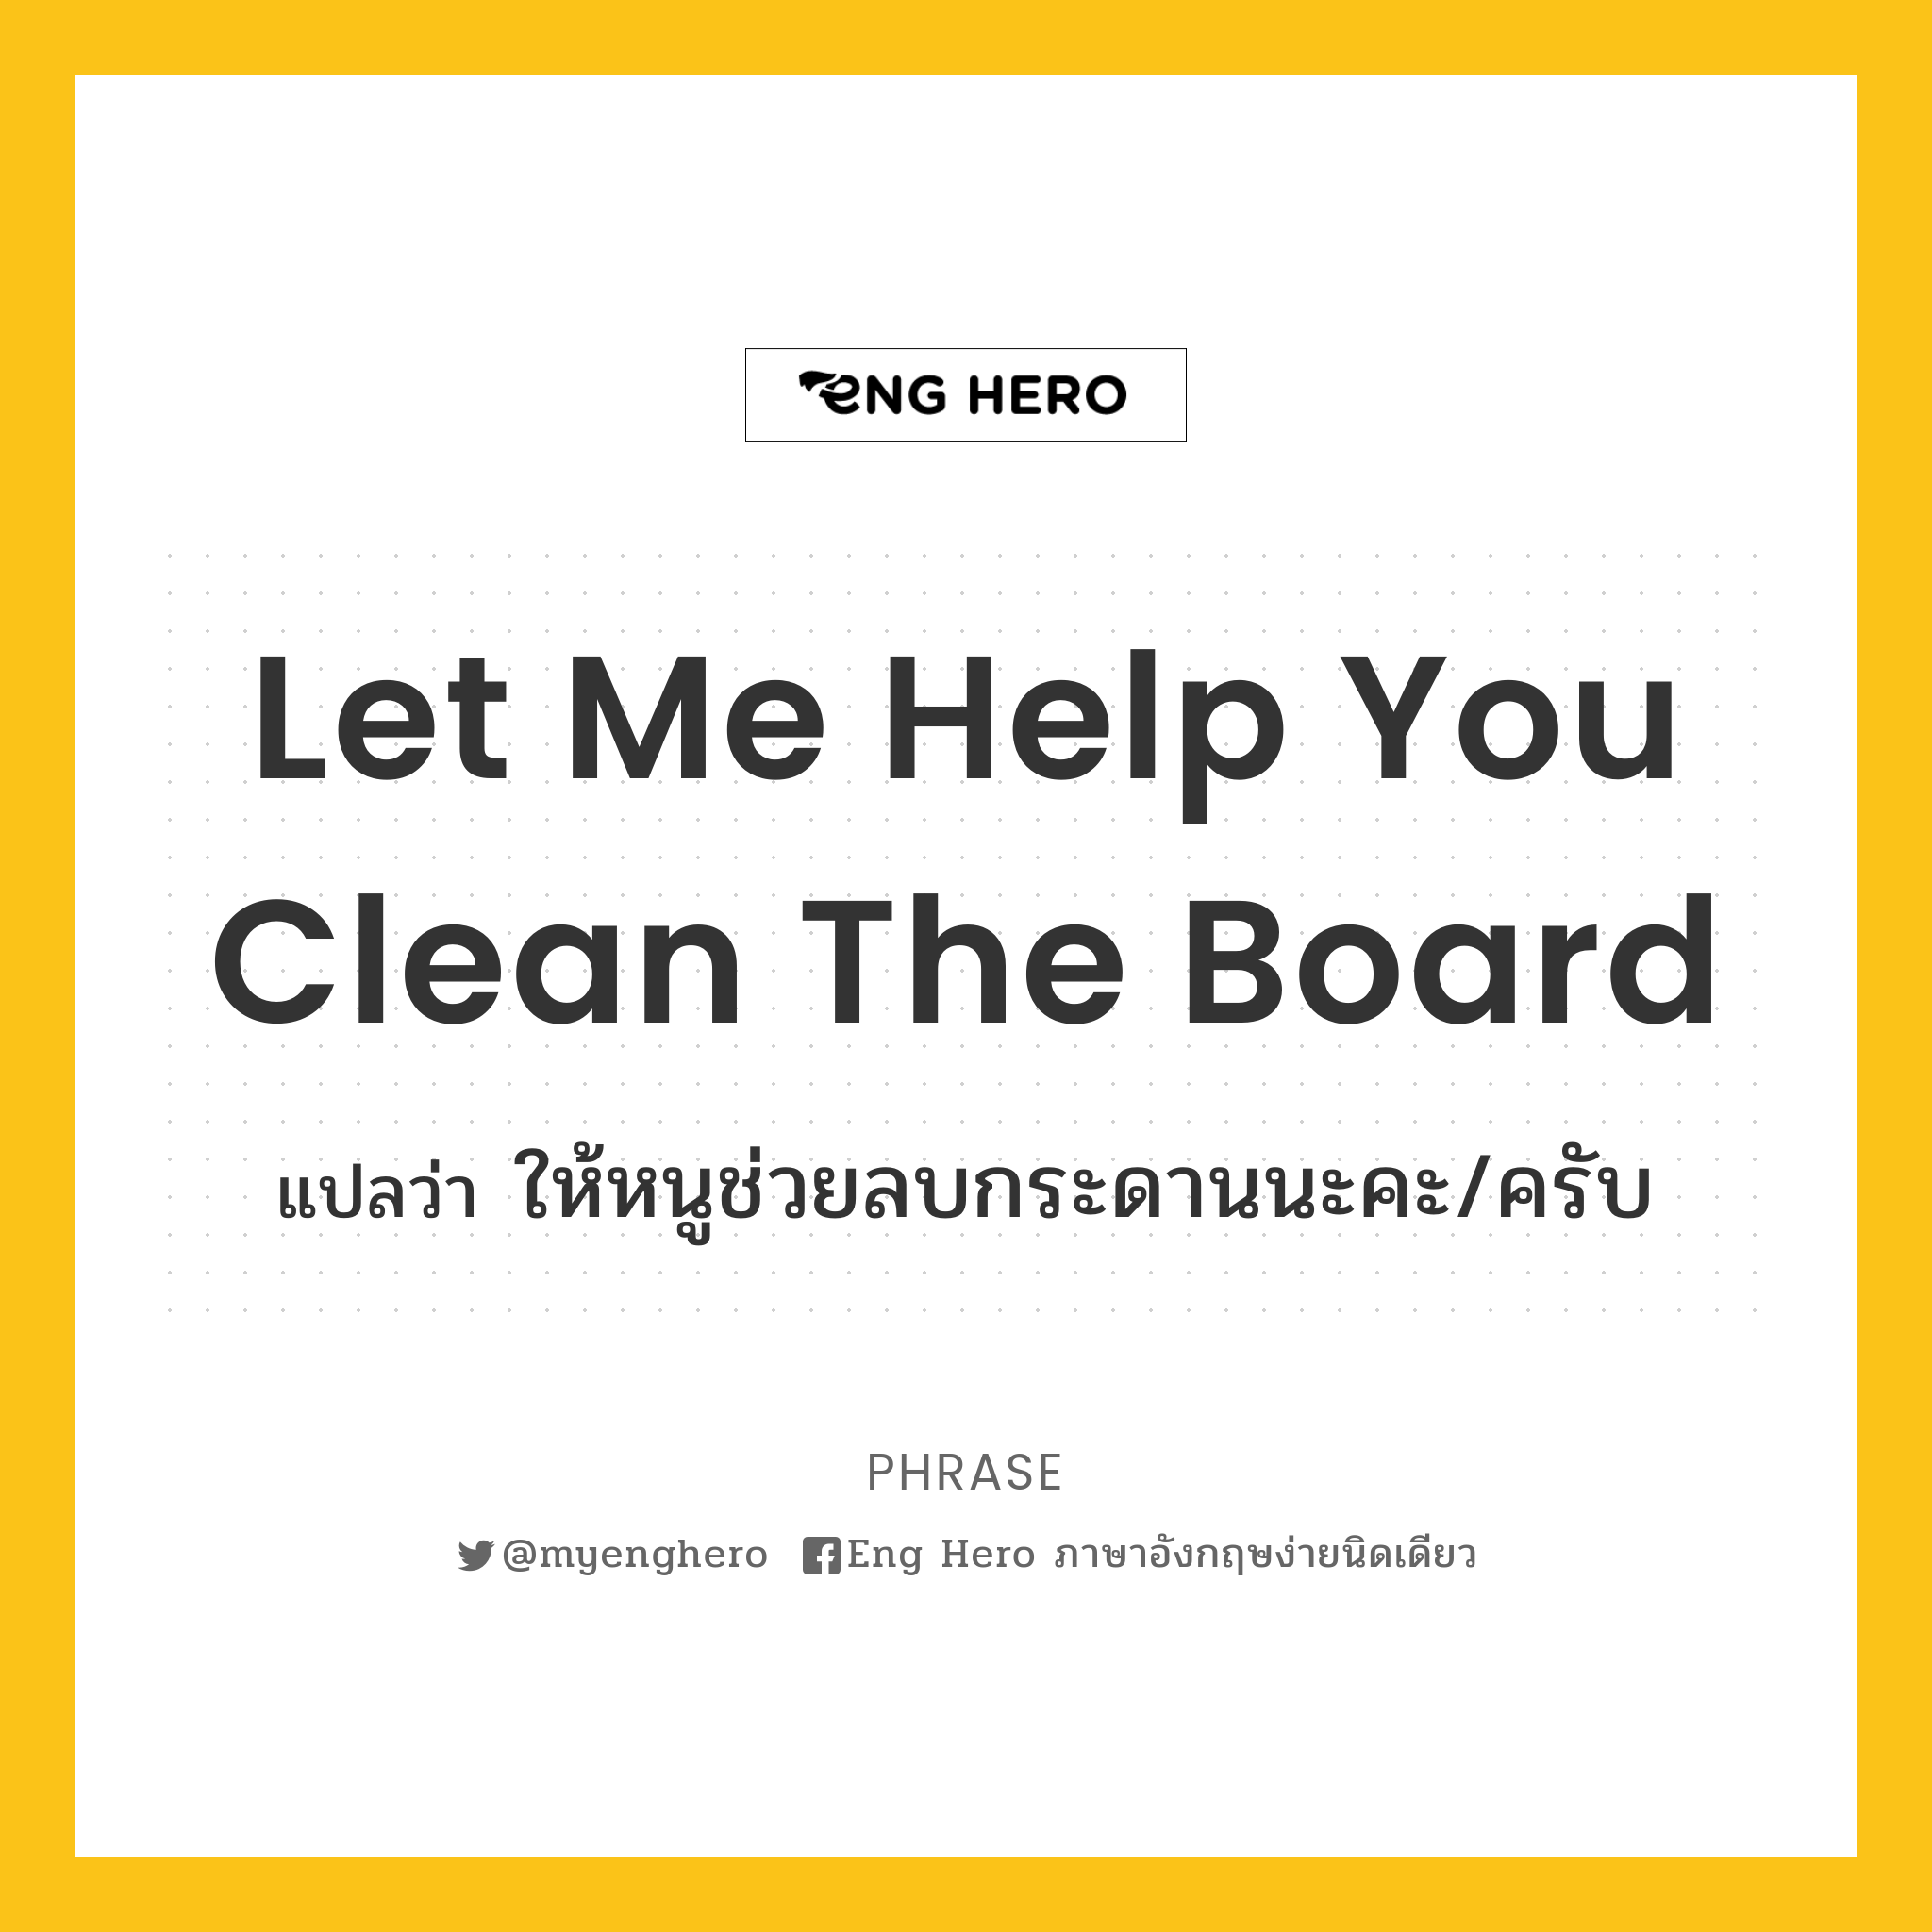 Let me help you clean the board